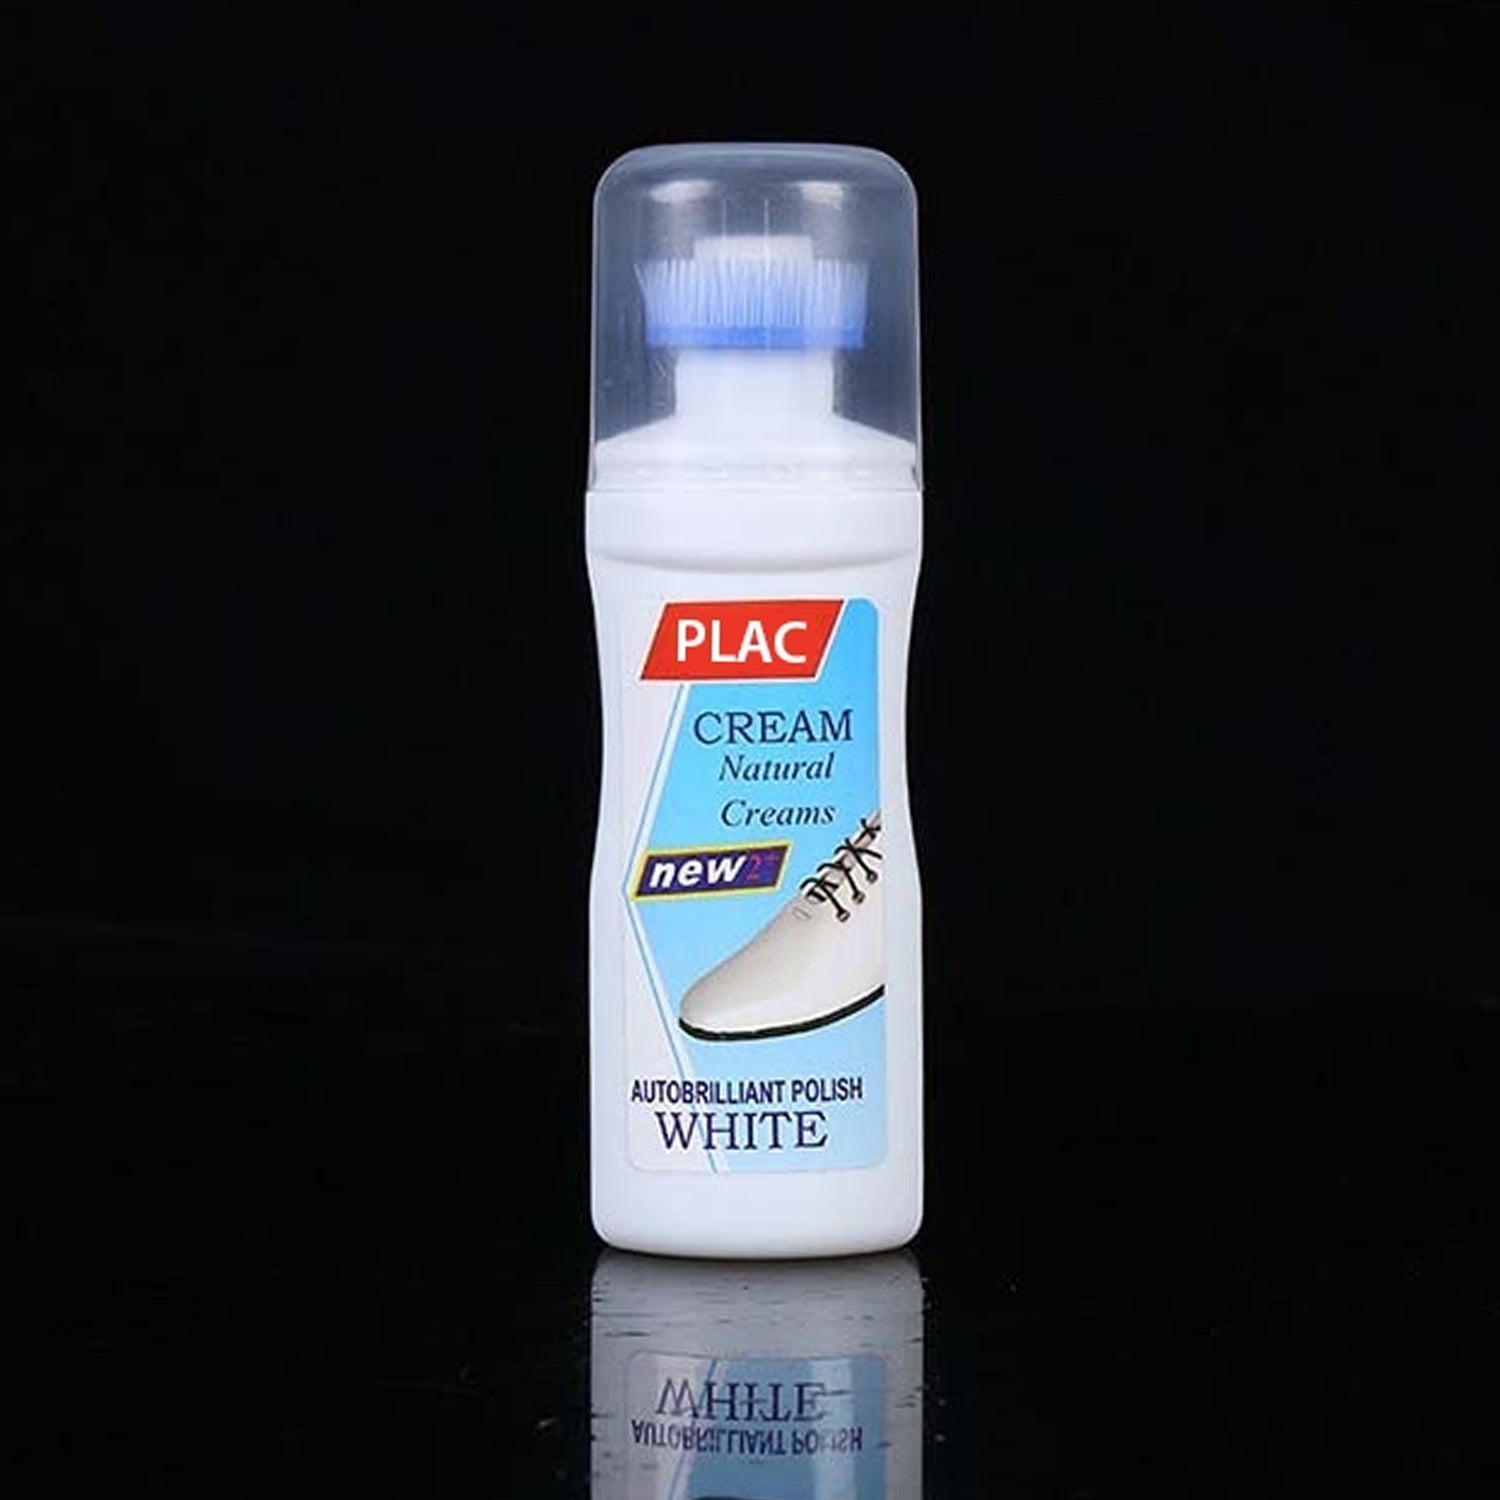 17734 White Shoe Brightener with Removal of Dirt and Whitening Function White Shoes Cleaner with Brush Head for Dirty Shoe Polish Natural Waxes (75 ML)